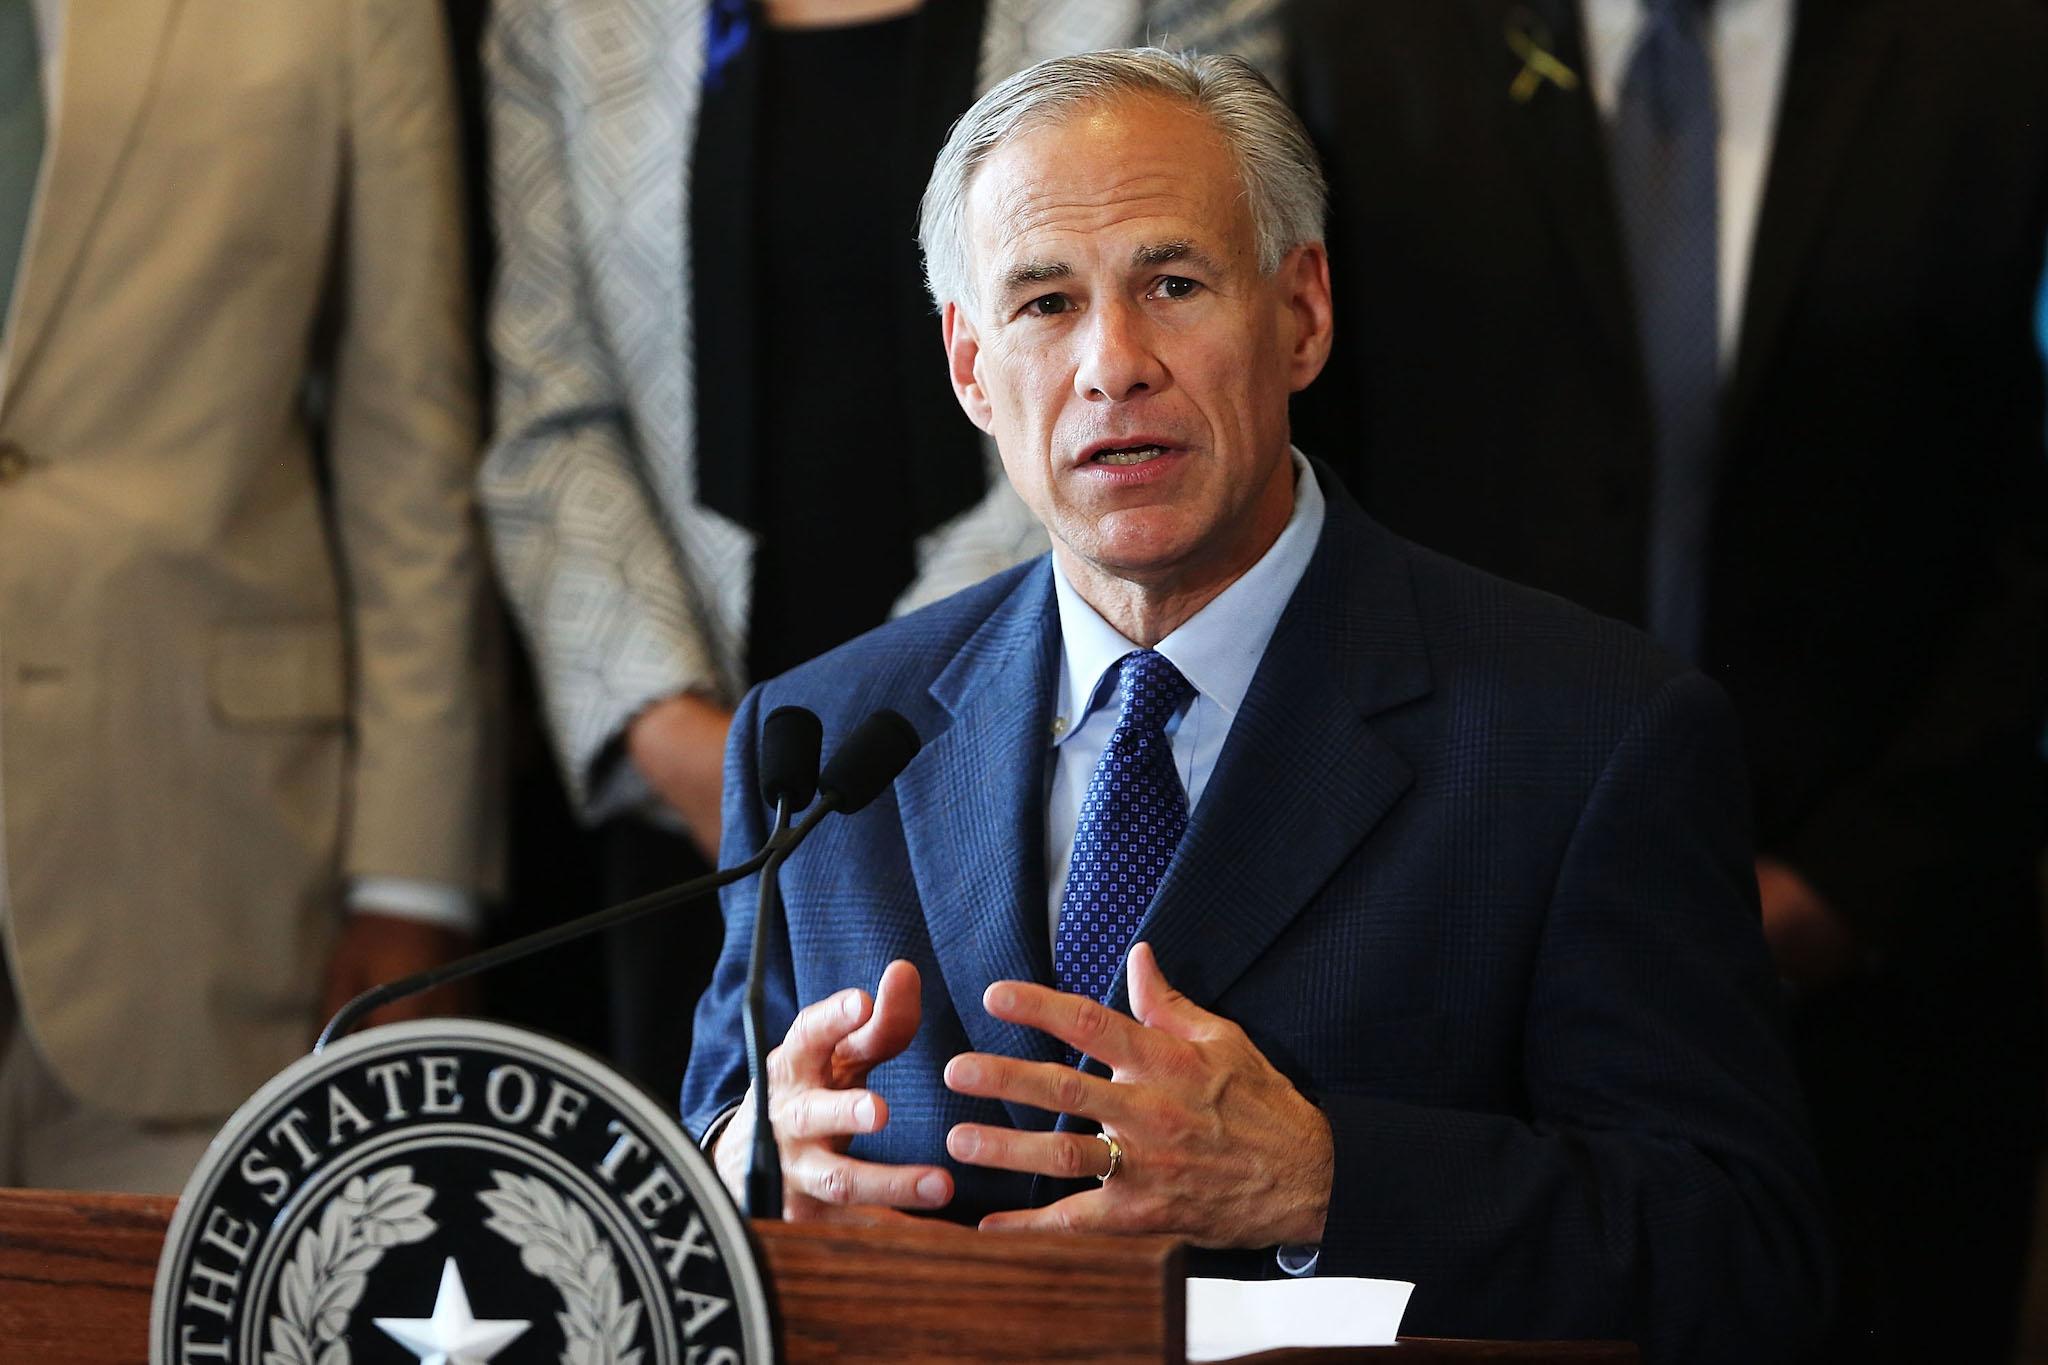 Current Texas Governor Greg Abbott, who will run for reelection